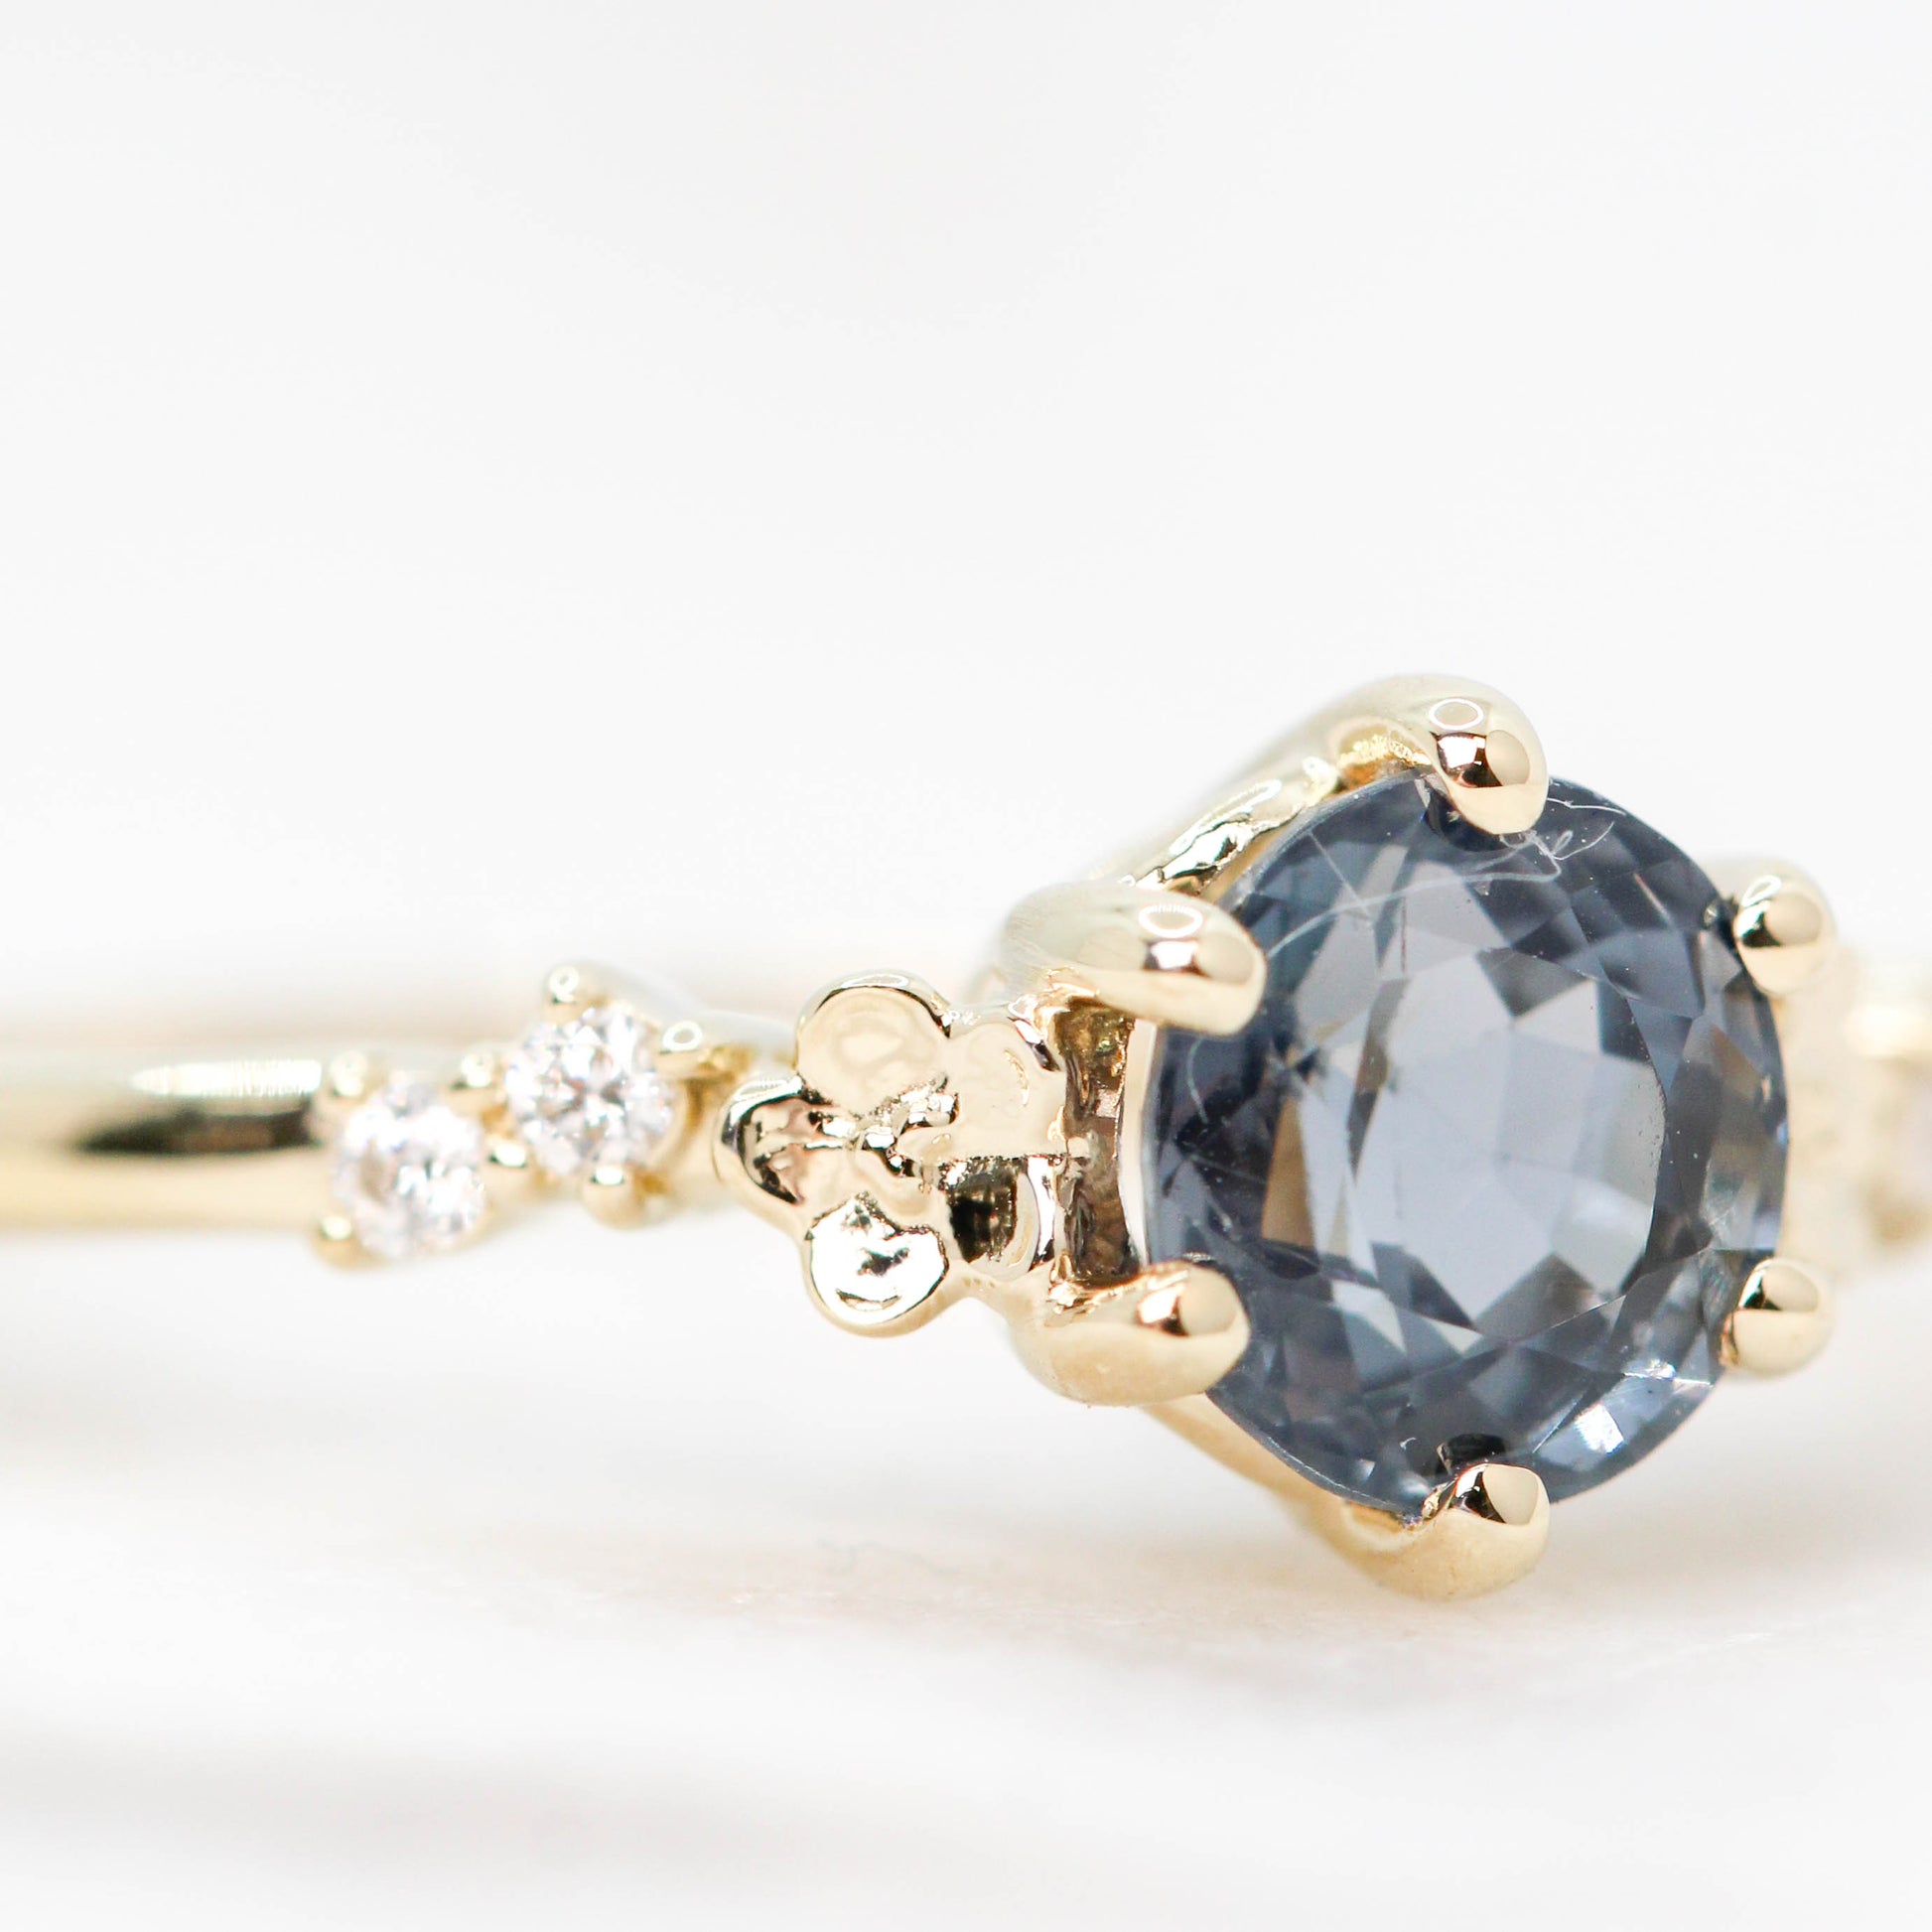 Meadow Ring with a 0.75 Carat Blue  Rounded Oval Spinel and White Accent Diamonds in 14k Yellow Gold - Ready to Size and Ship - Midwinter Co. Alternative Bridal Rings and Modern Fine Jewelry